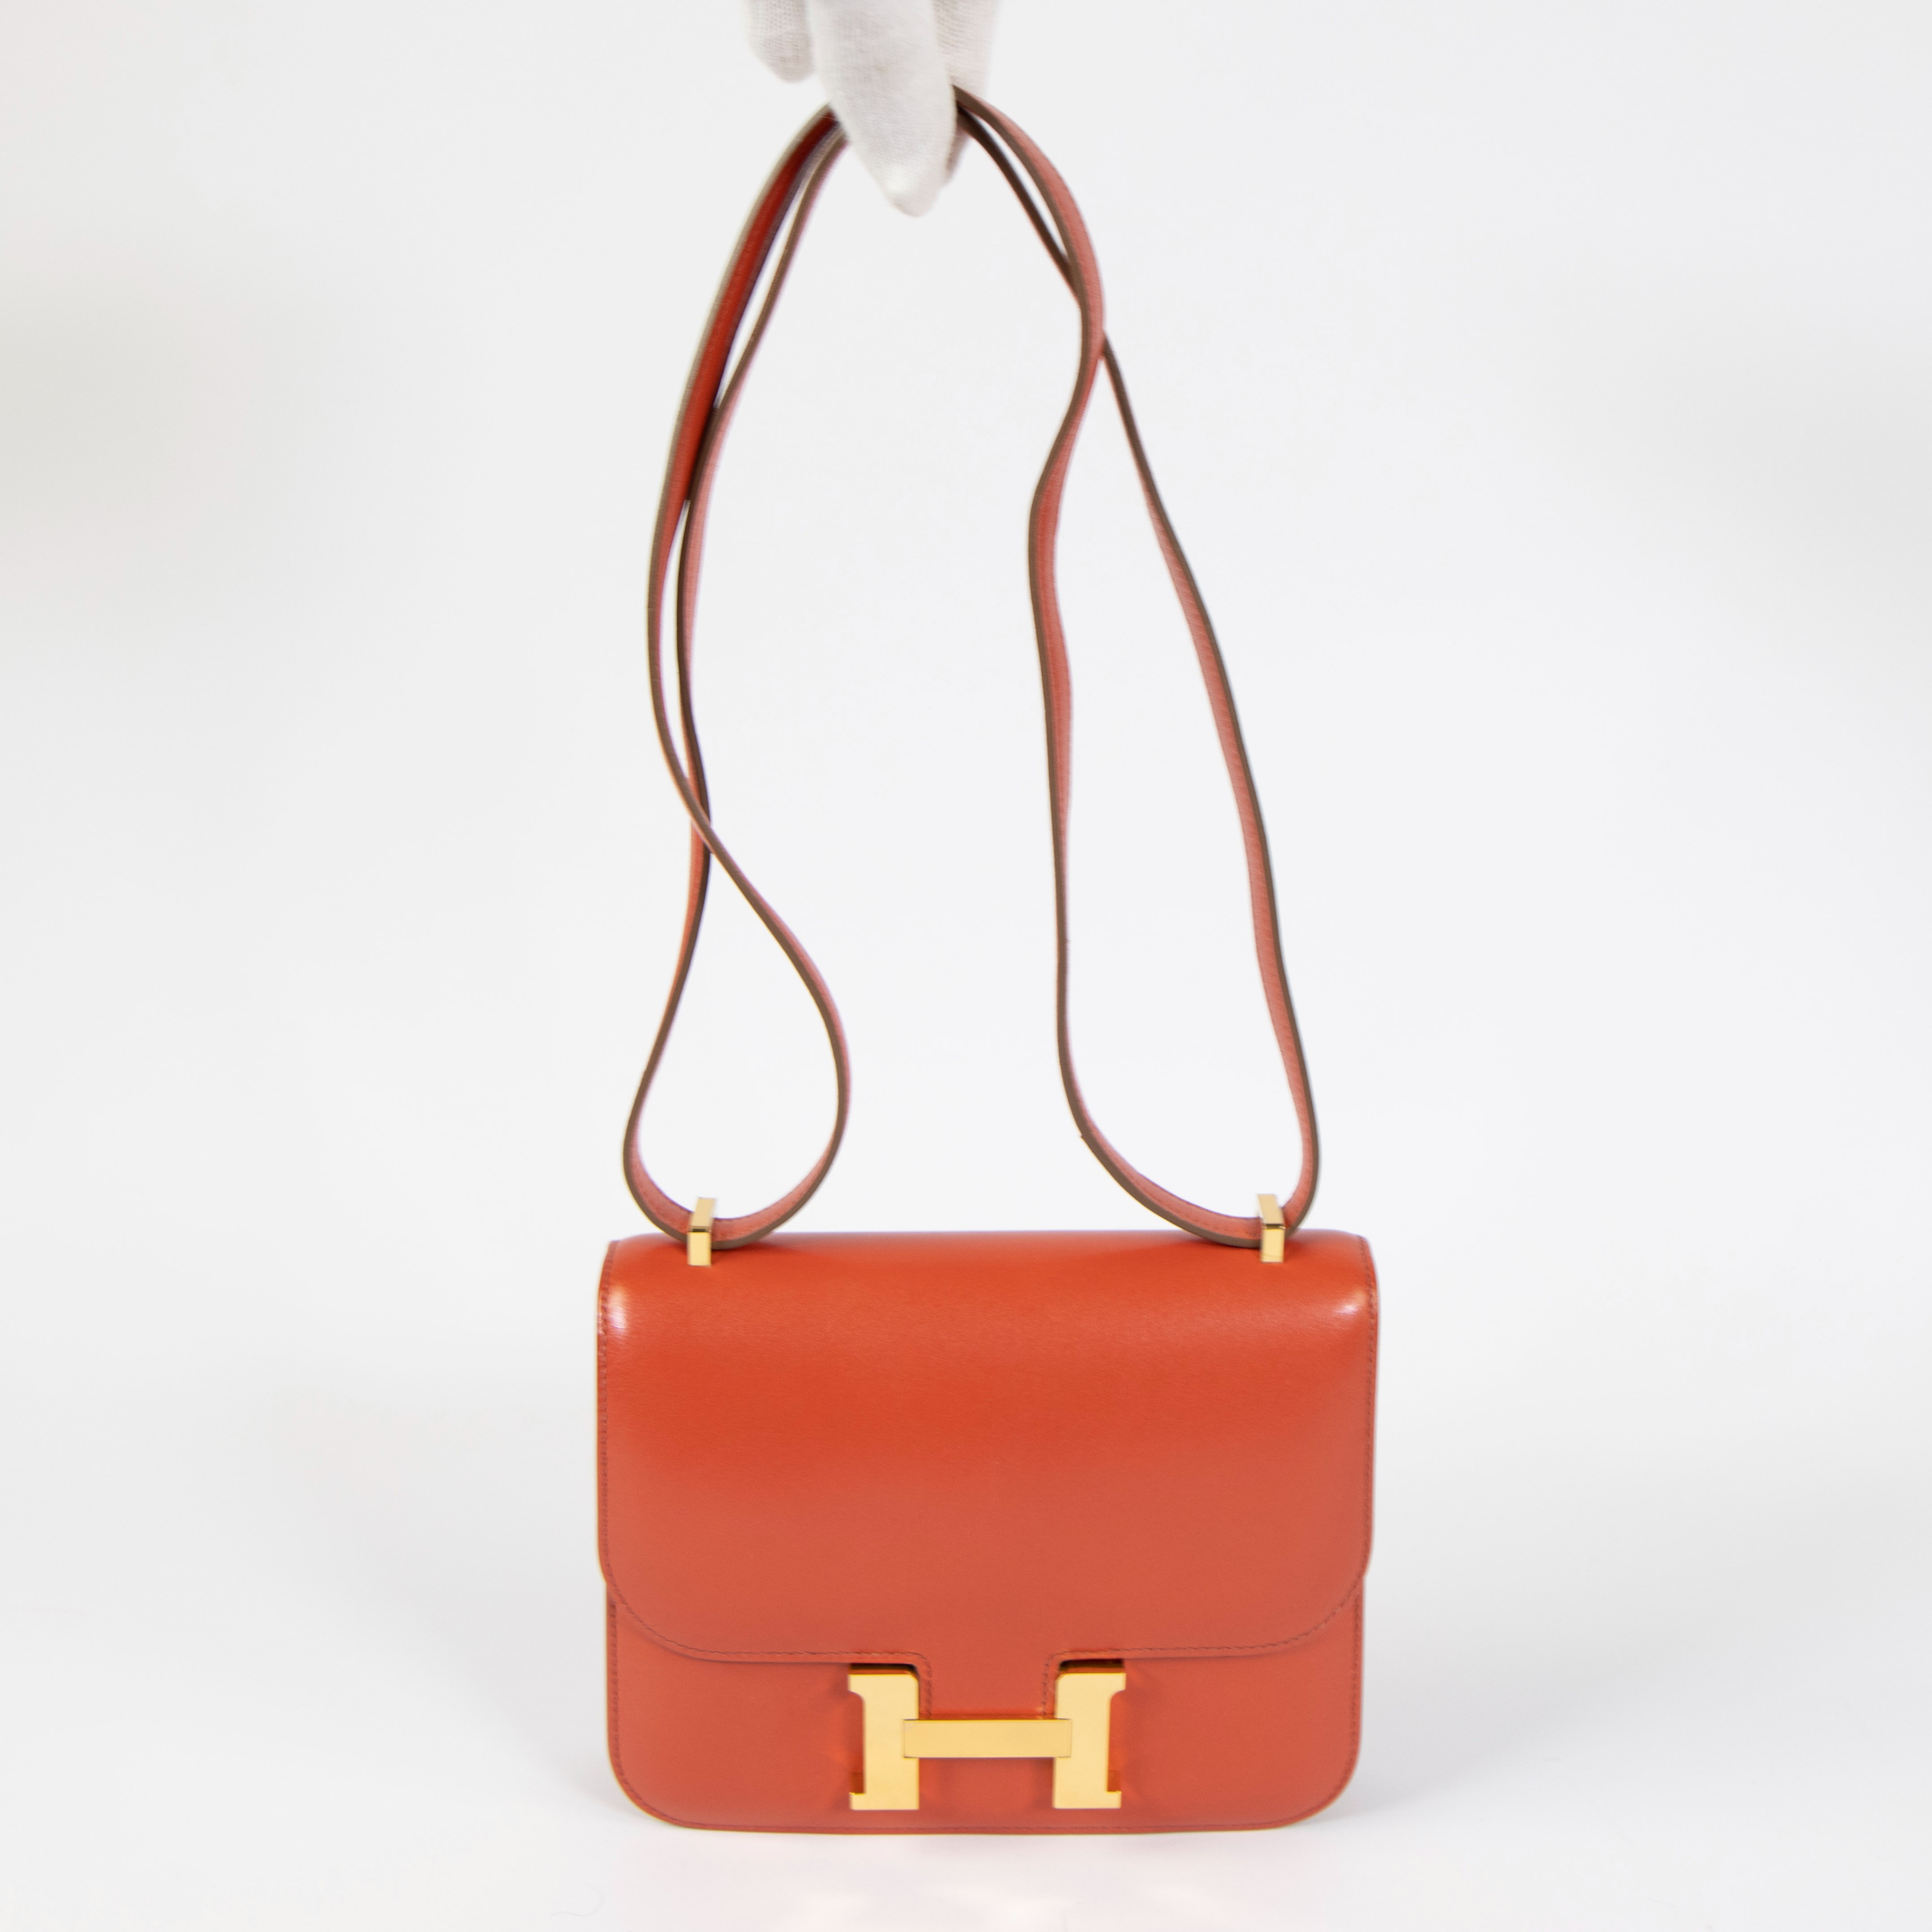 Hermes leather handback model Constance coral color with original bag and box - Image 3 of 9